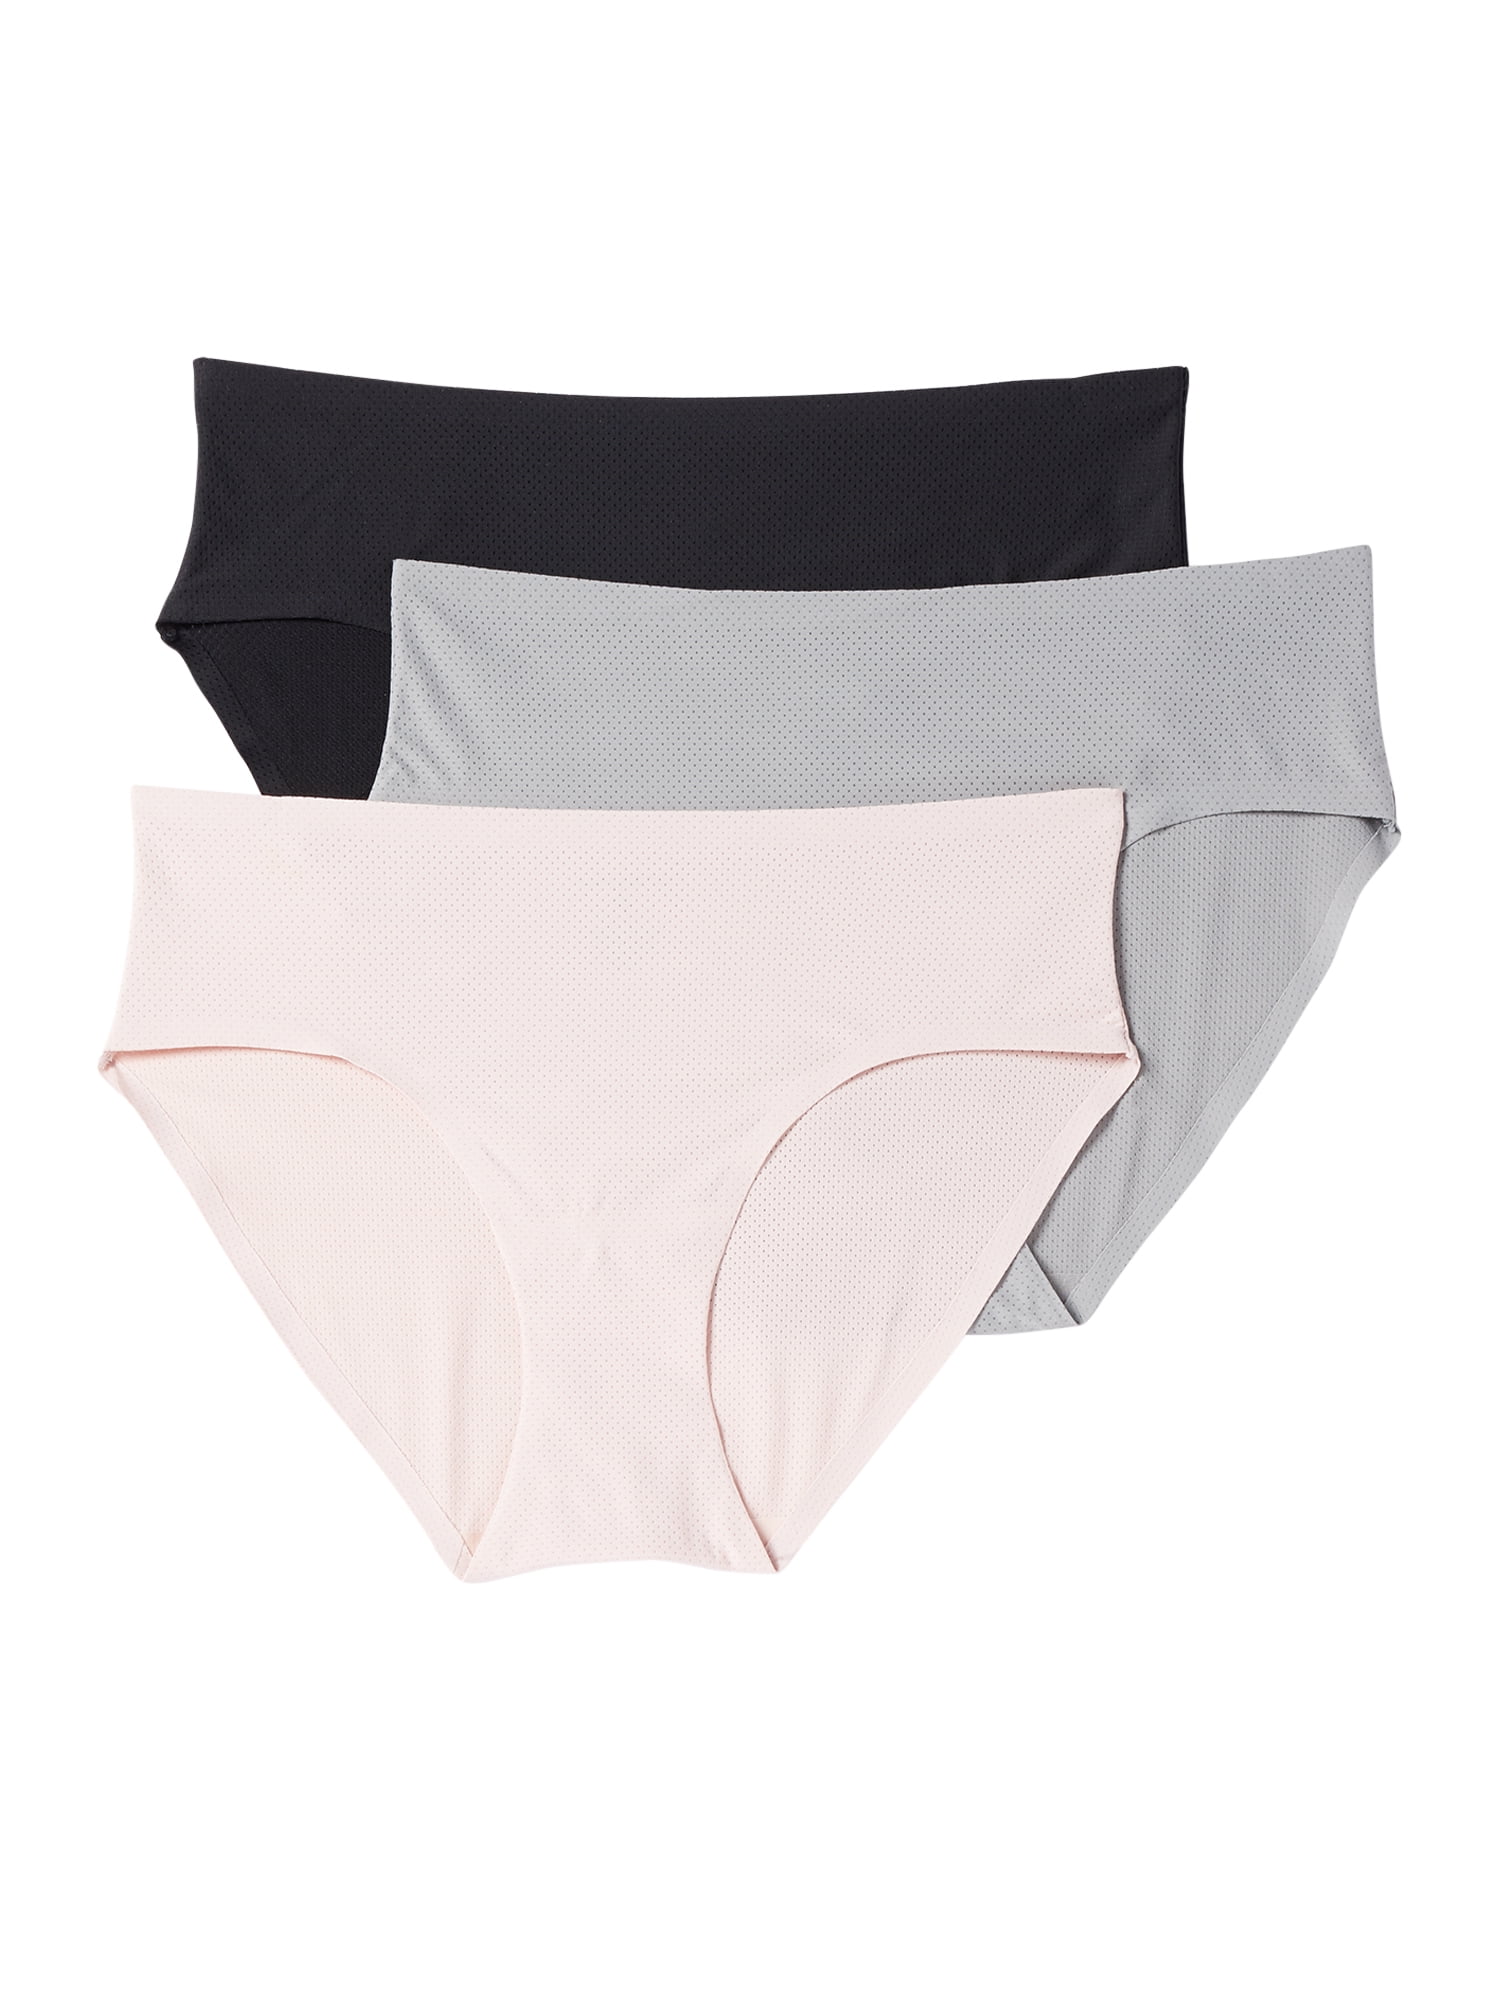 Layer 8 Women's Bonded Edge Hipster Panties, 3-Pack